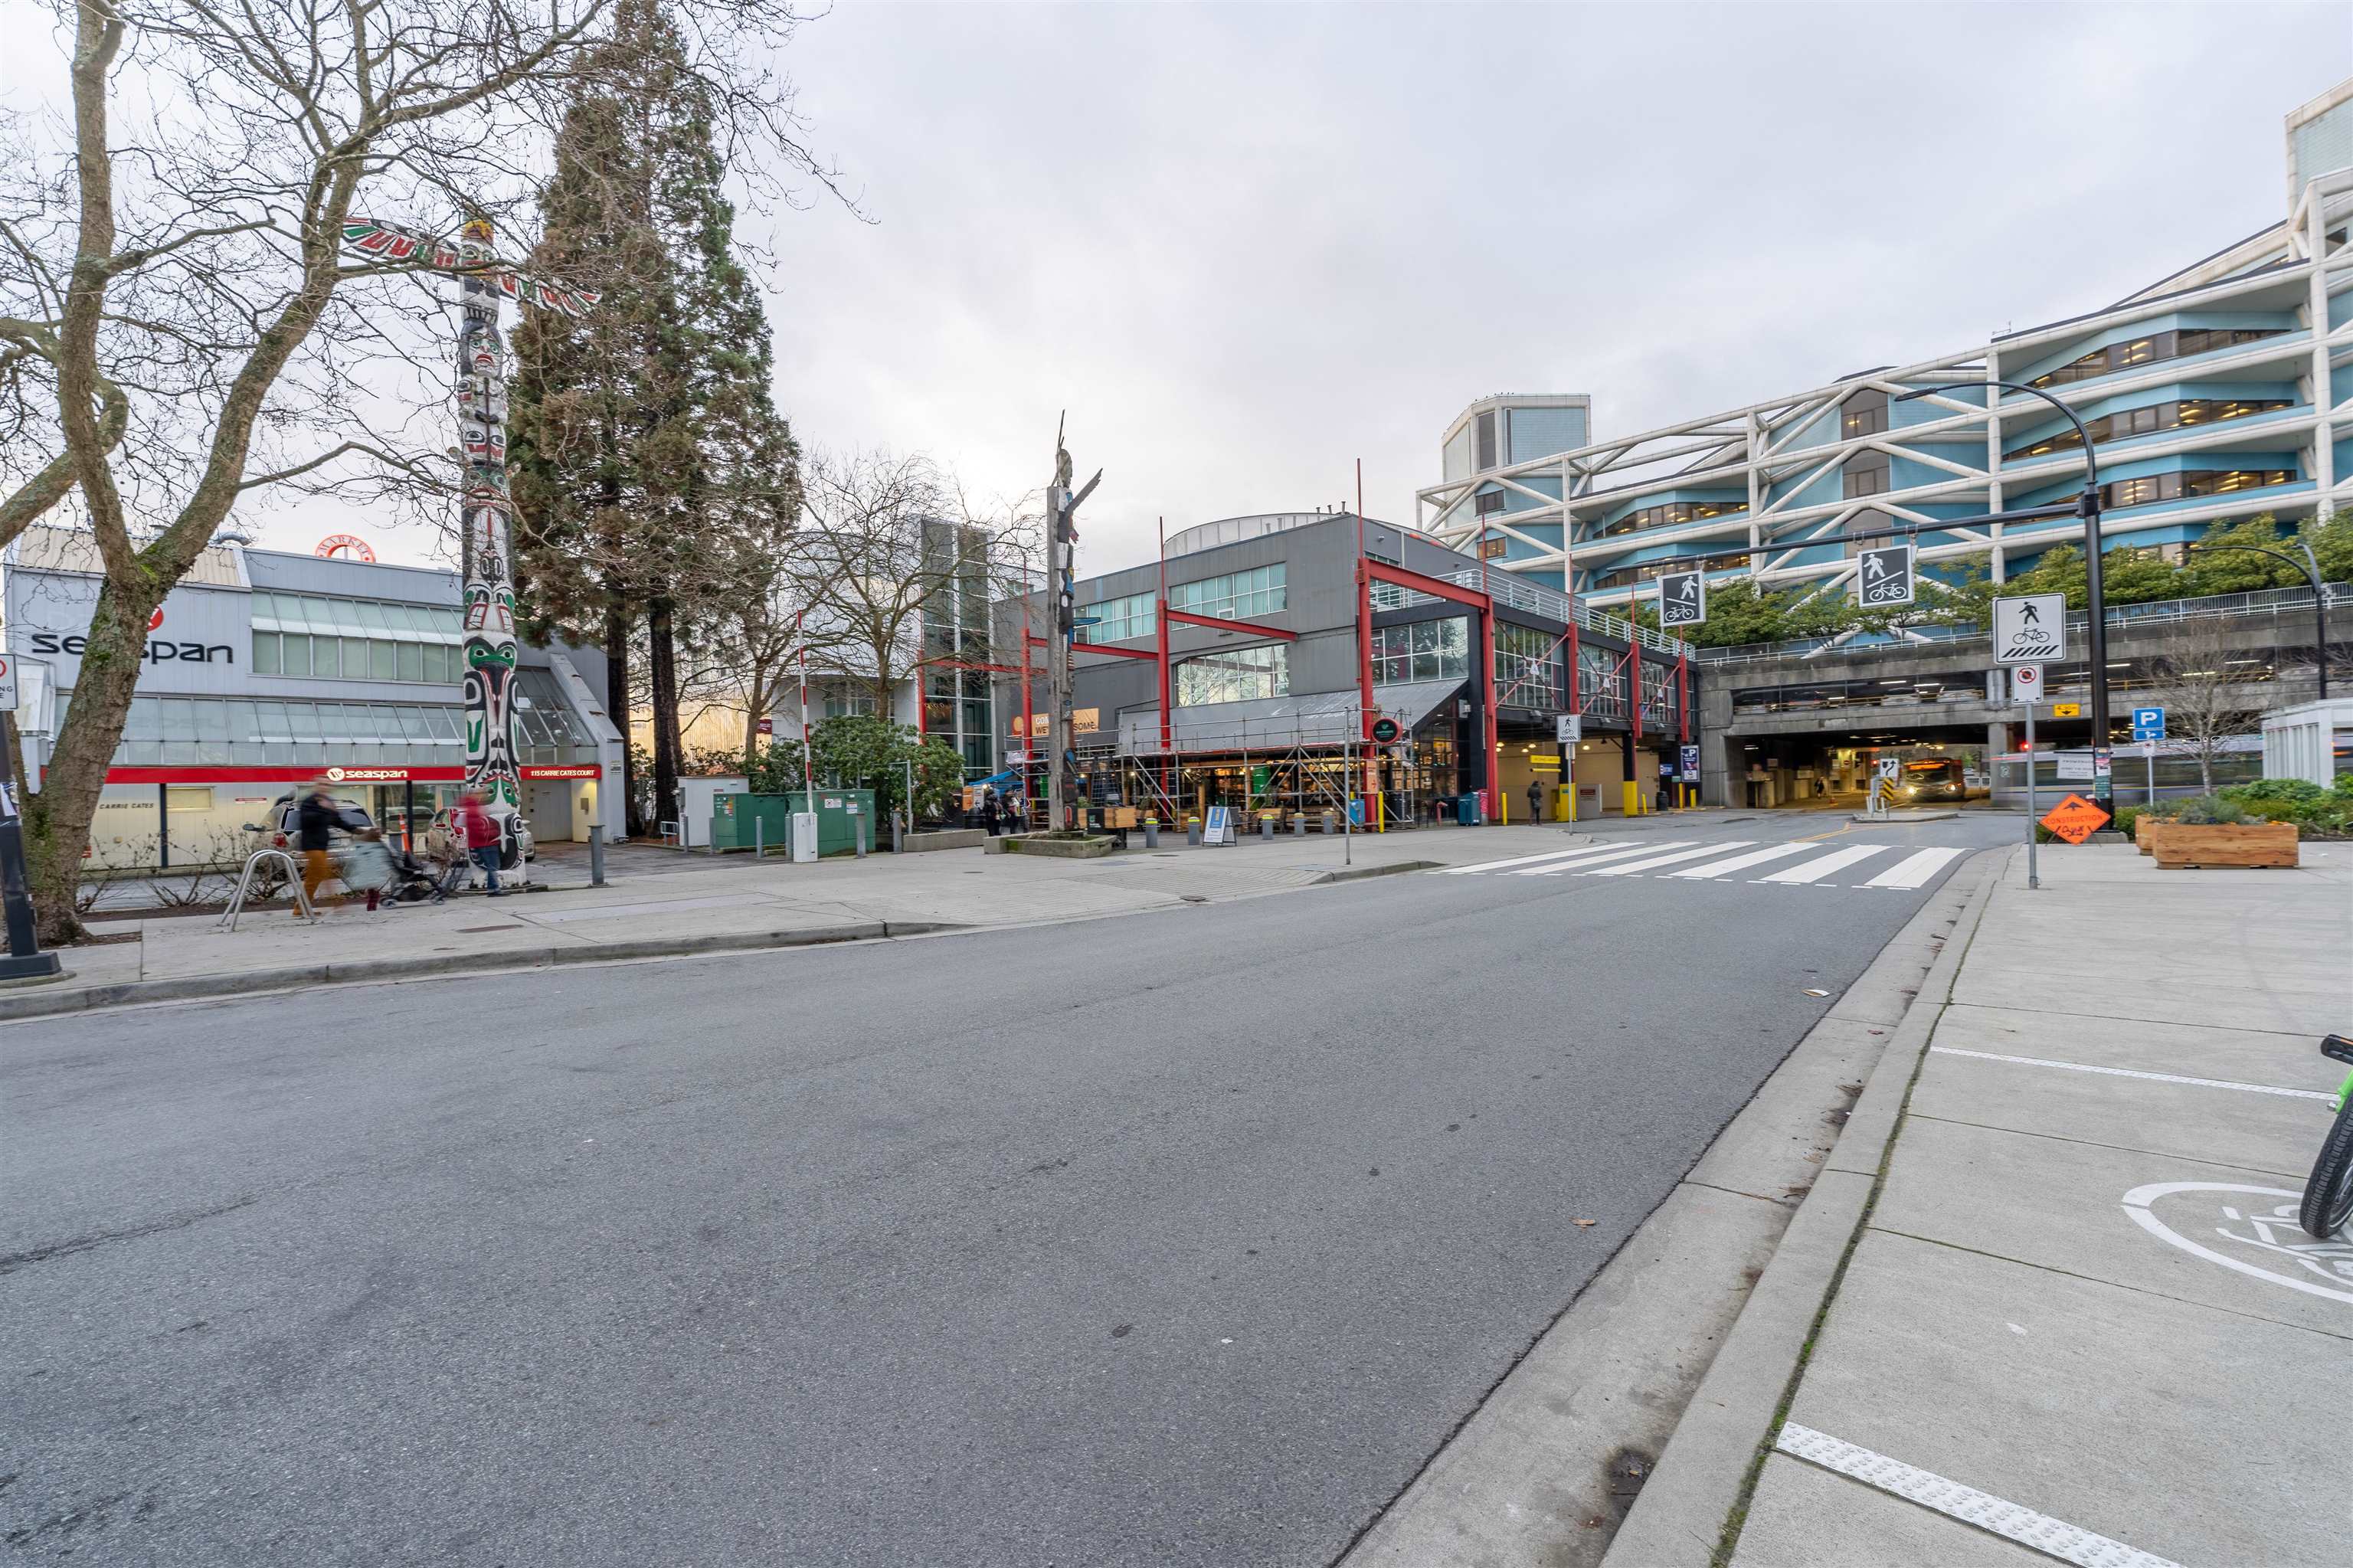 Wilson Lam Realtor, 112 CARRIE CATES COURT, North Vancouver, British Columbia V7M 0G7, Retail,For Lease ,C8049258